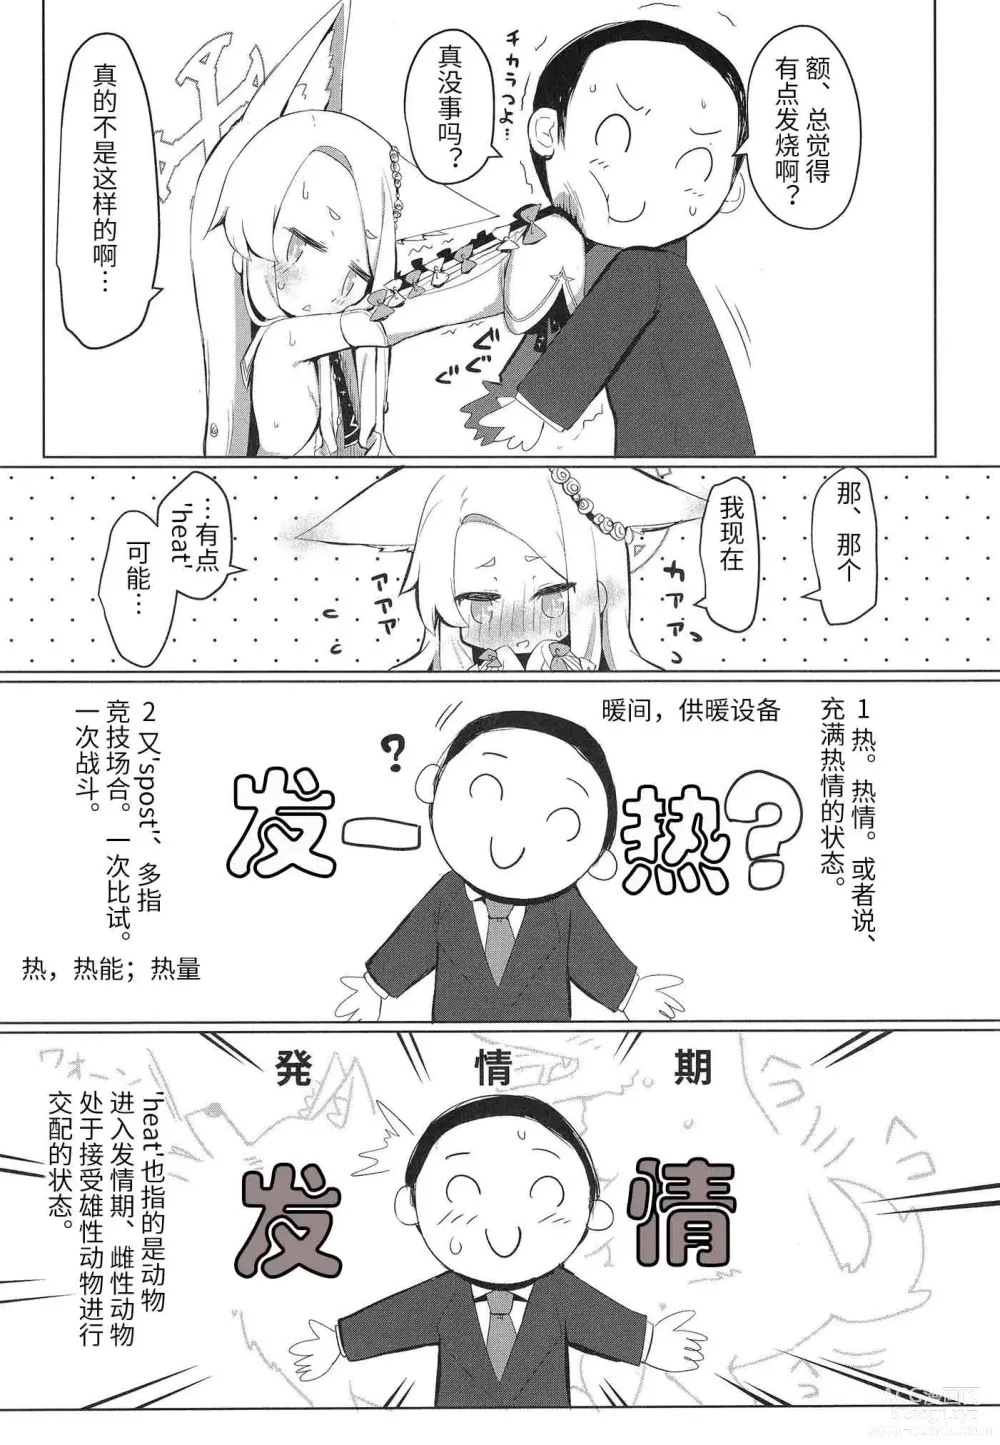 Page 5 of doujinshi 抱歉的发情圣娅